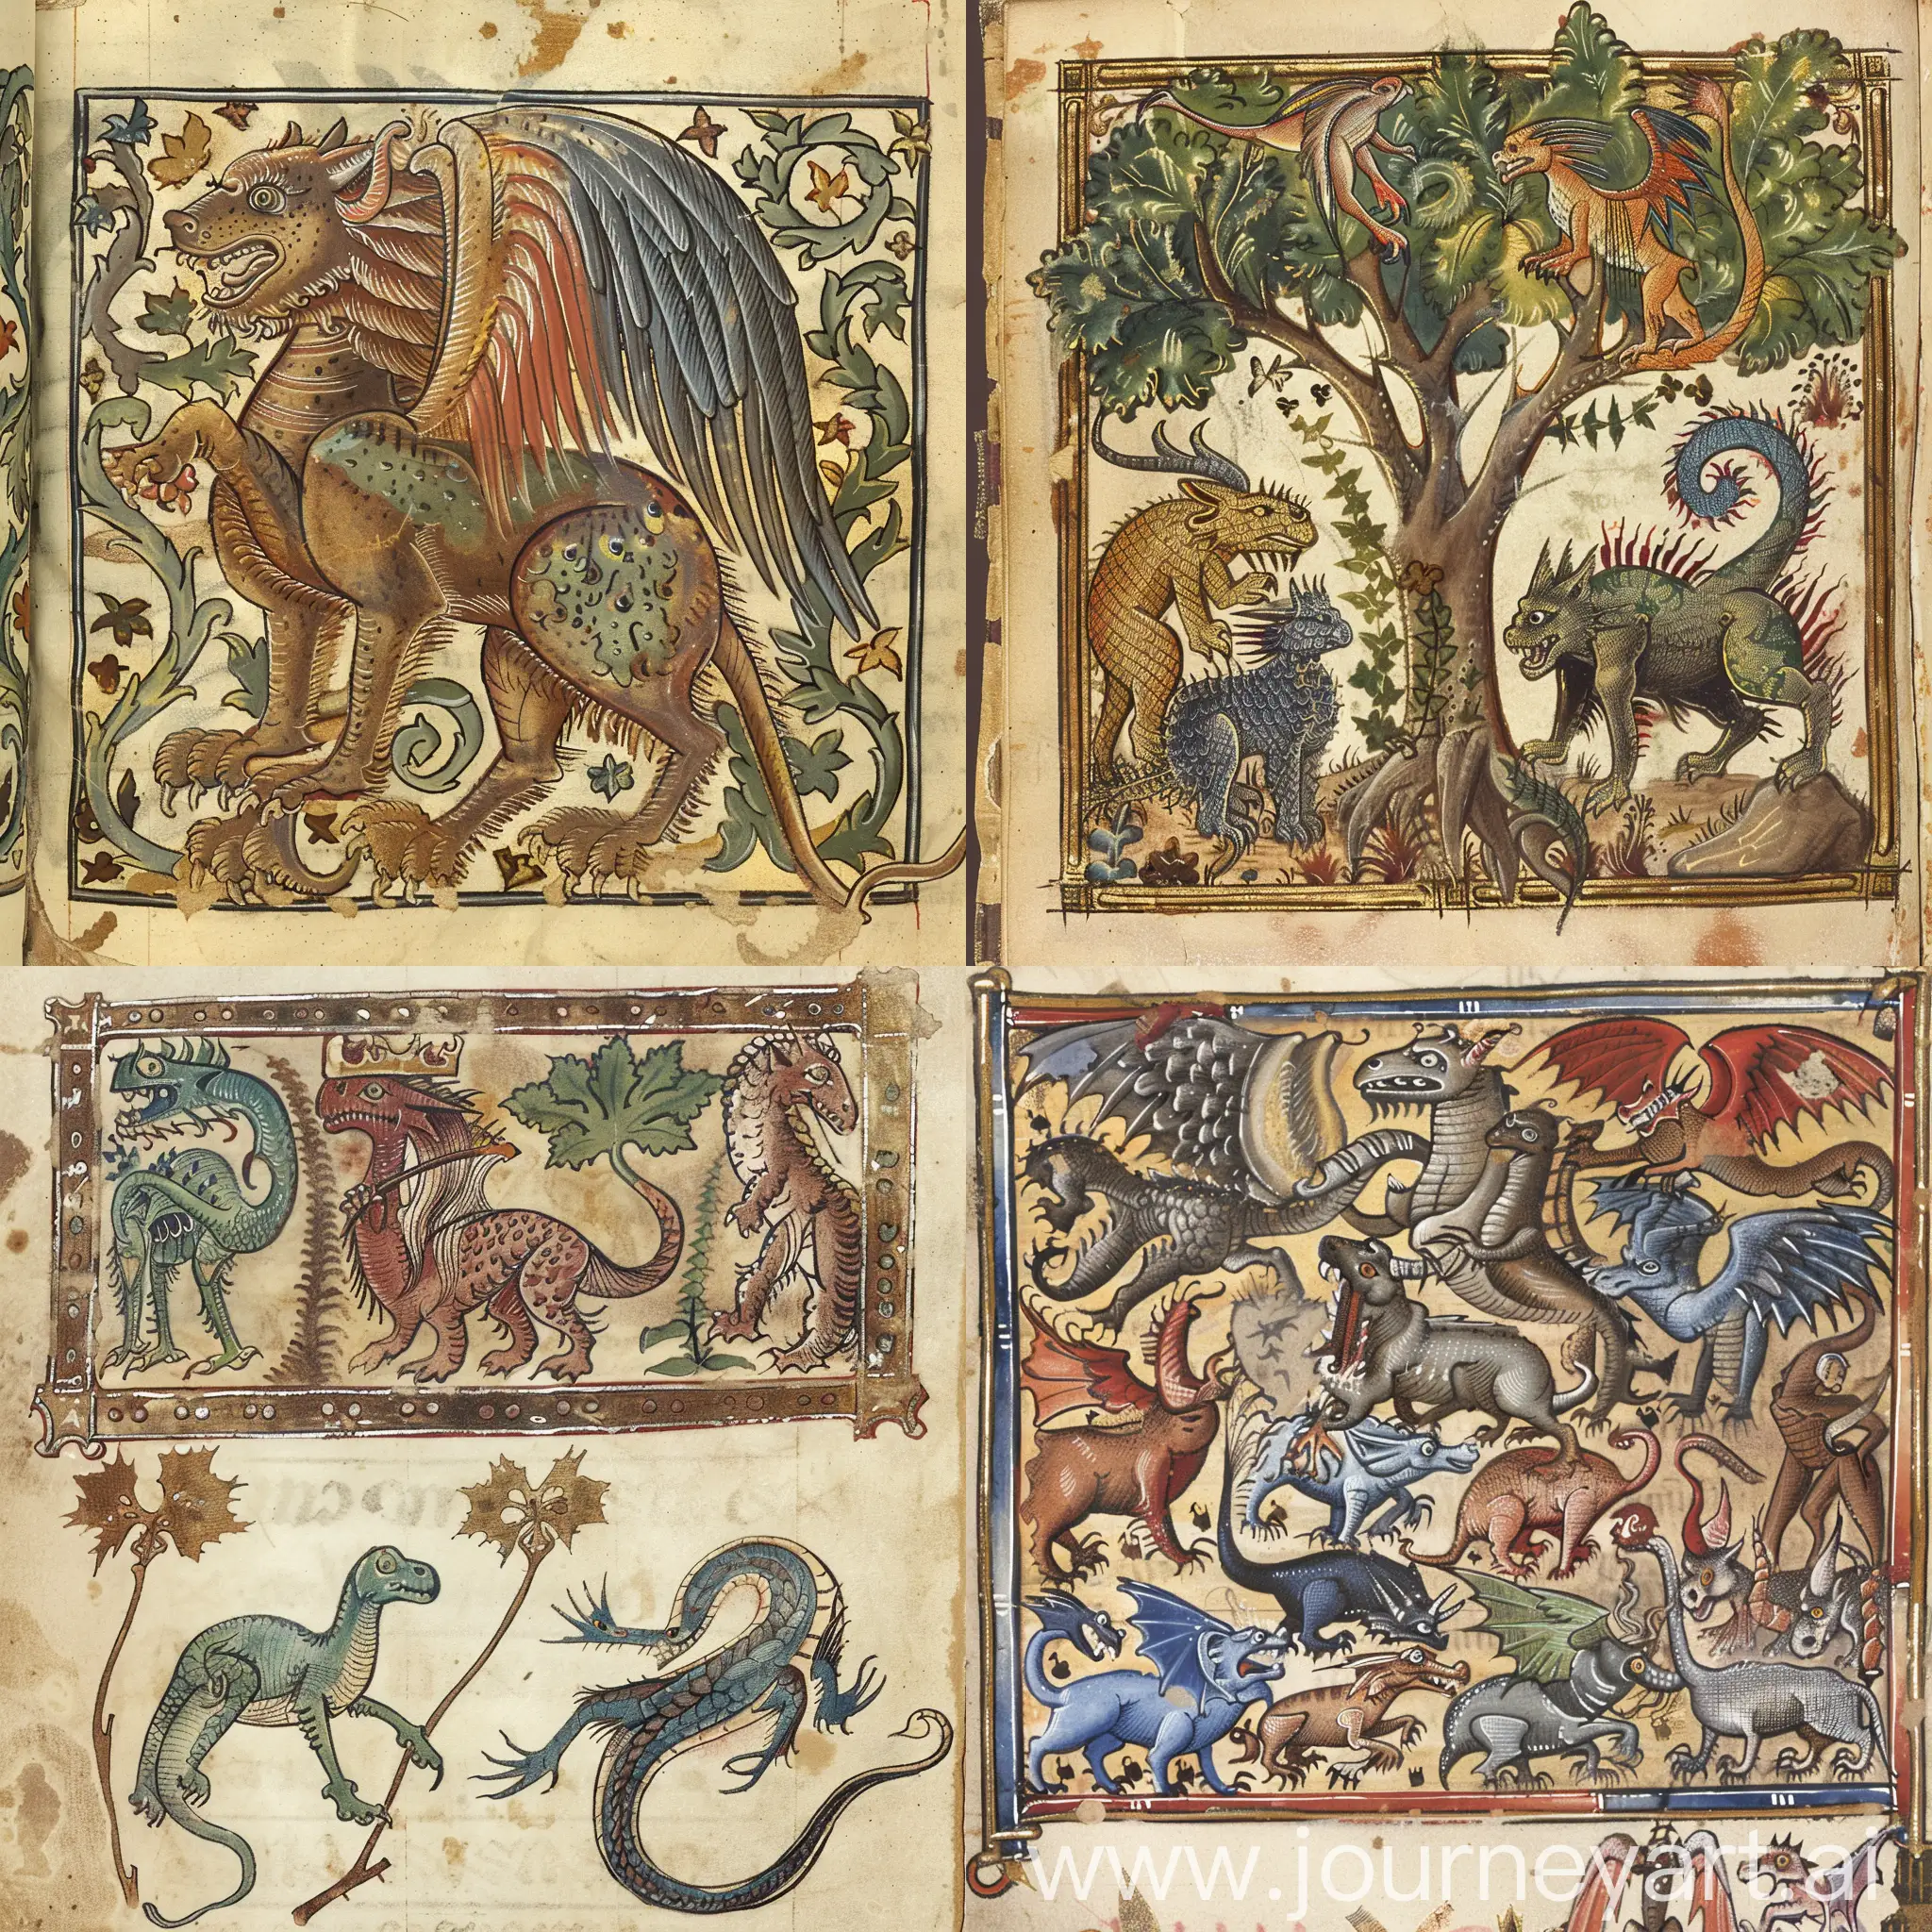 Illuminated-Medieval-Bestiary-Manuscript-Page-with-Vibrant-Illustrations